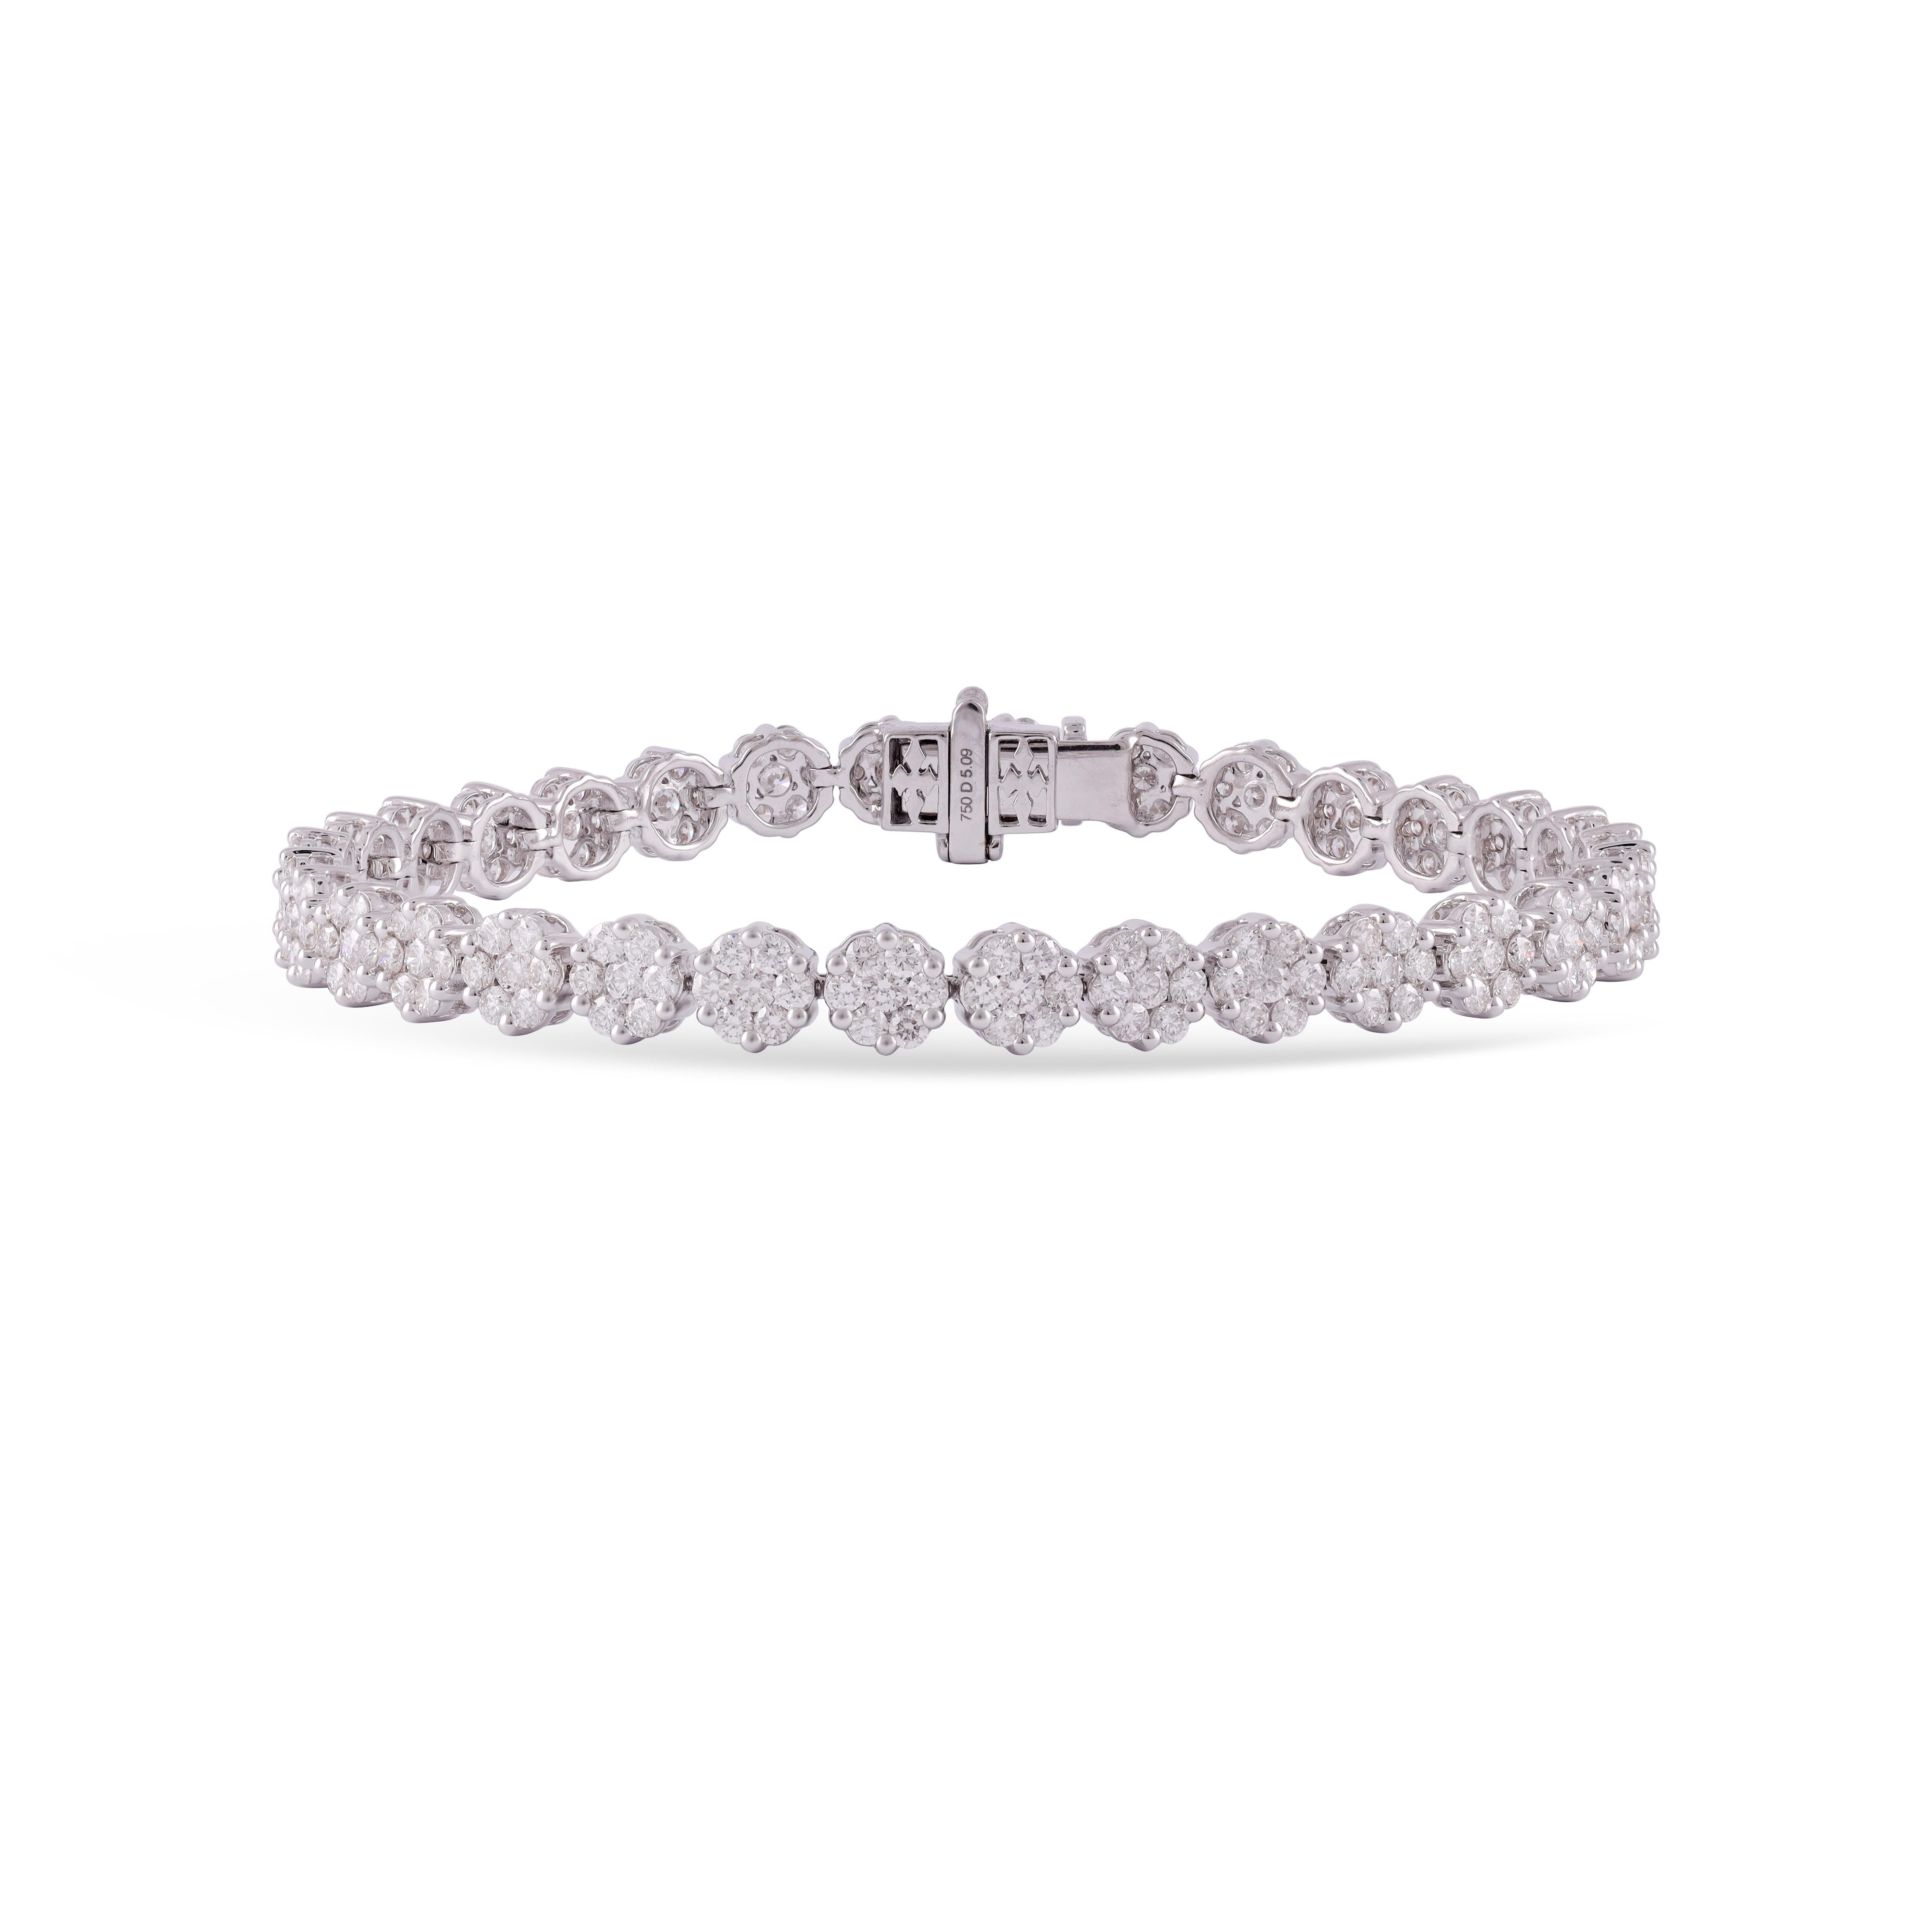 This is an elegant Diamond   bracelet features 224 pieces of princess cut Diamond  5.09 carat this bracelet entirely made in 18 karat White gold, this is a classic tennis bracelet.

size - 7